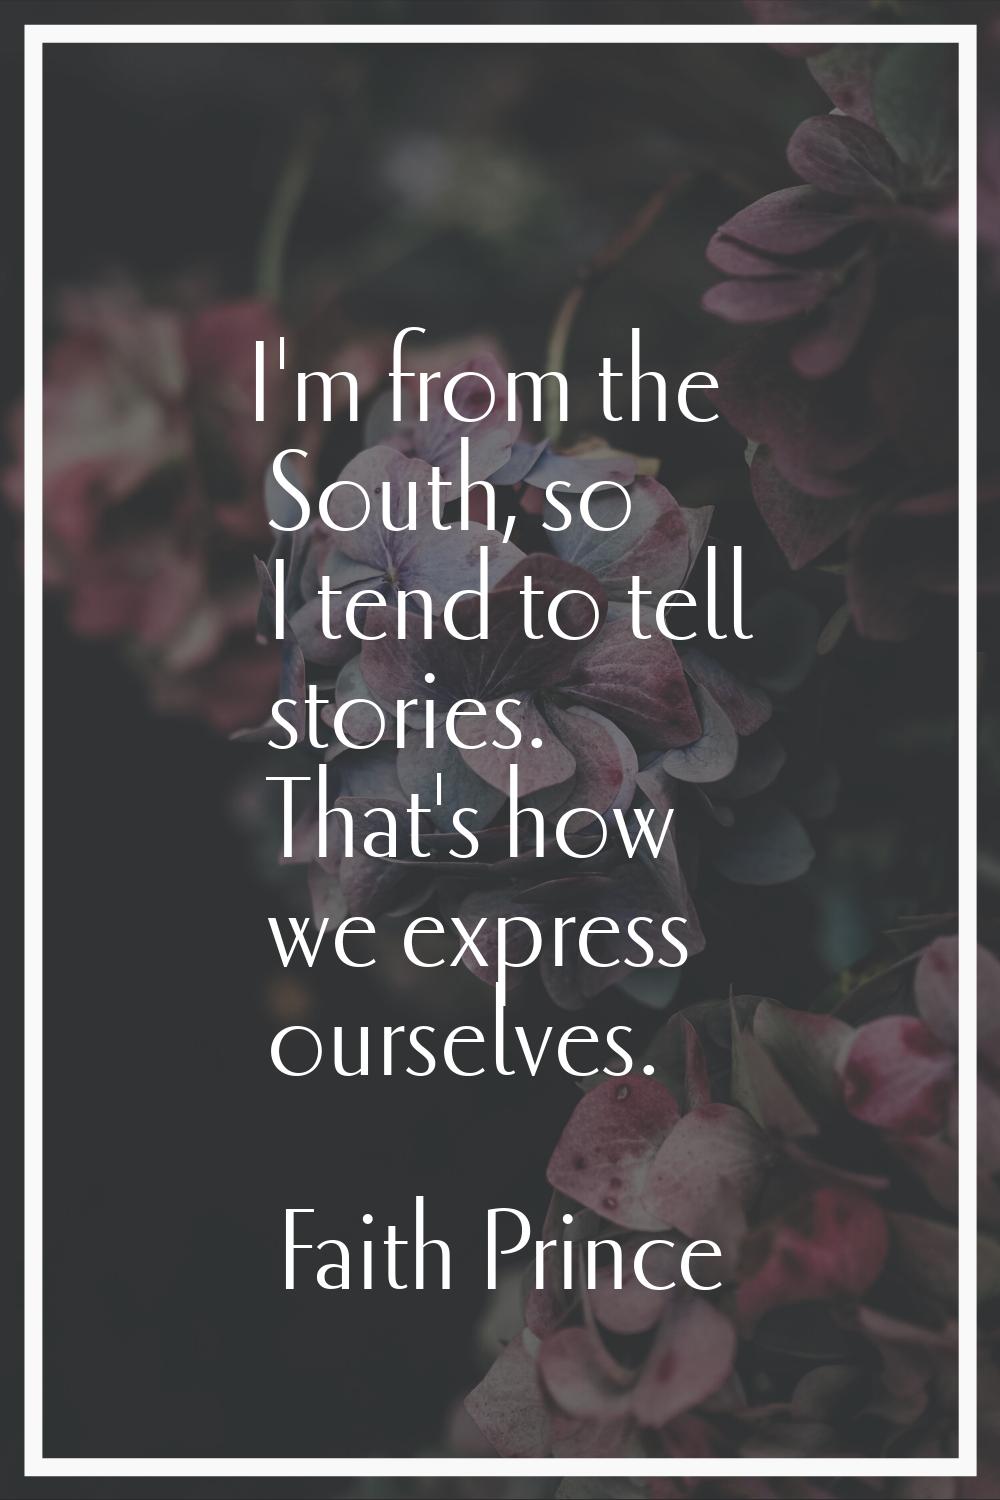 I'm from the South, so I tend to tell stories. That's how we express ourselves.